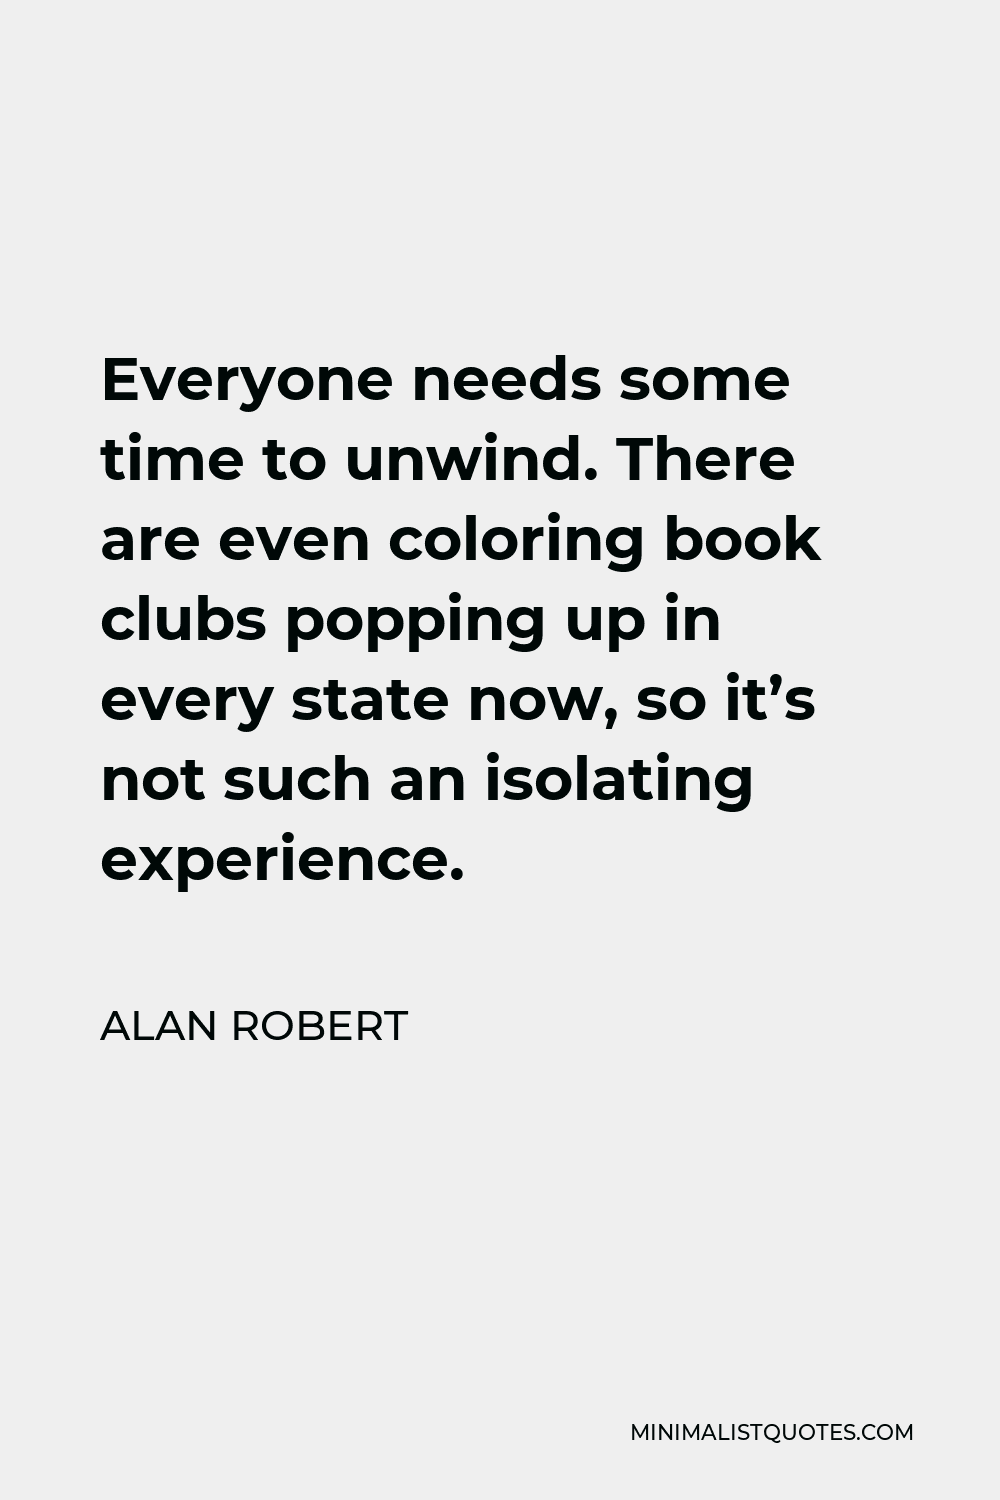 Alan Robert Quote - Everyone needs some time to unwind. There are even coloring book clubs popping up in every state now, so it’s not such an isolating experience.